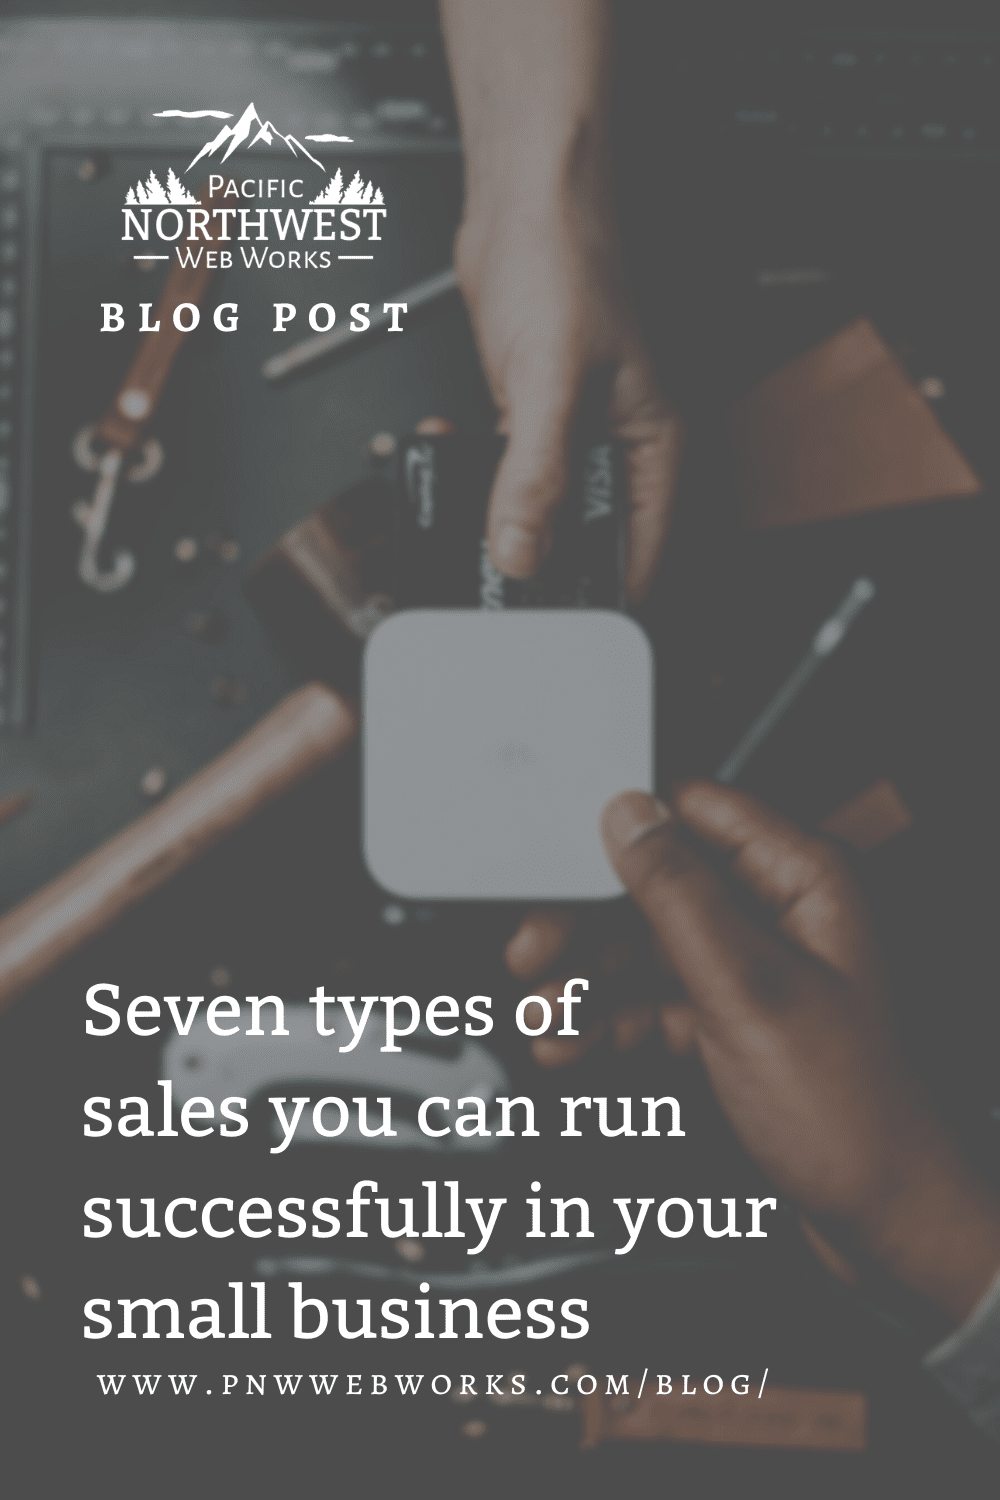 Seven types of sales you can run successfully in your small business